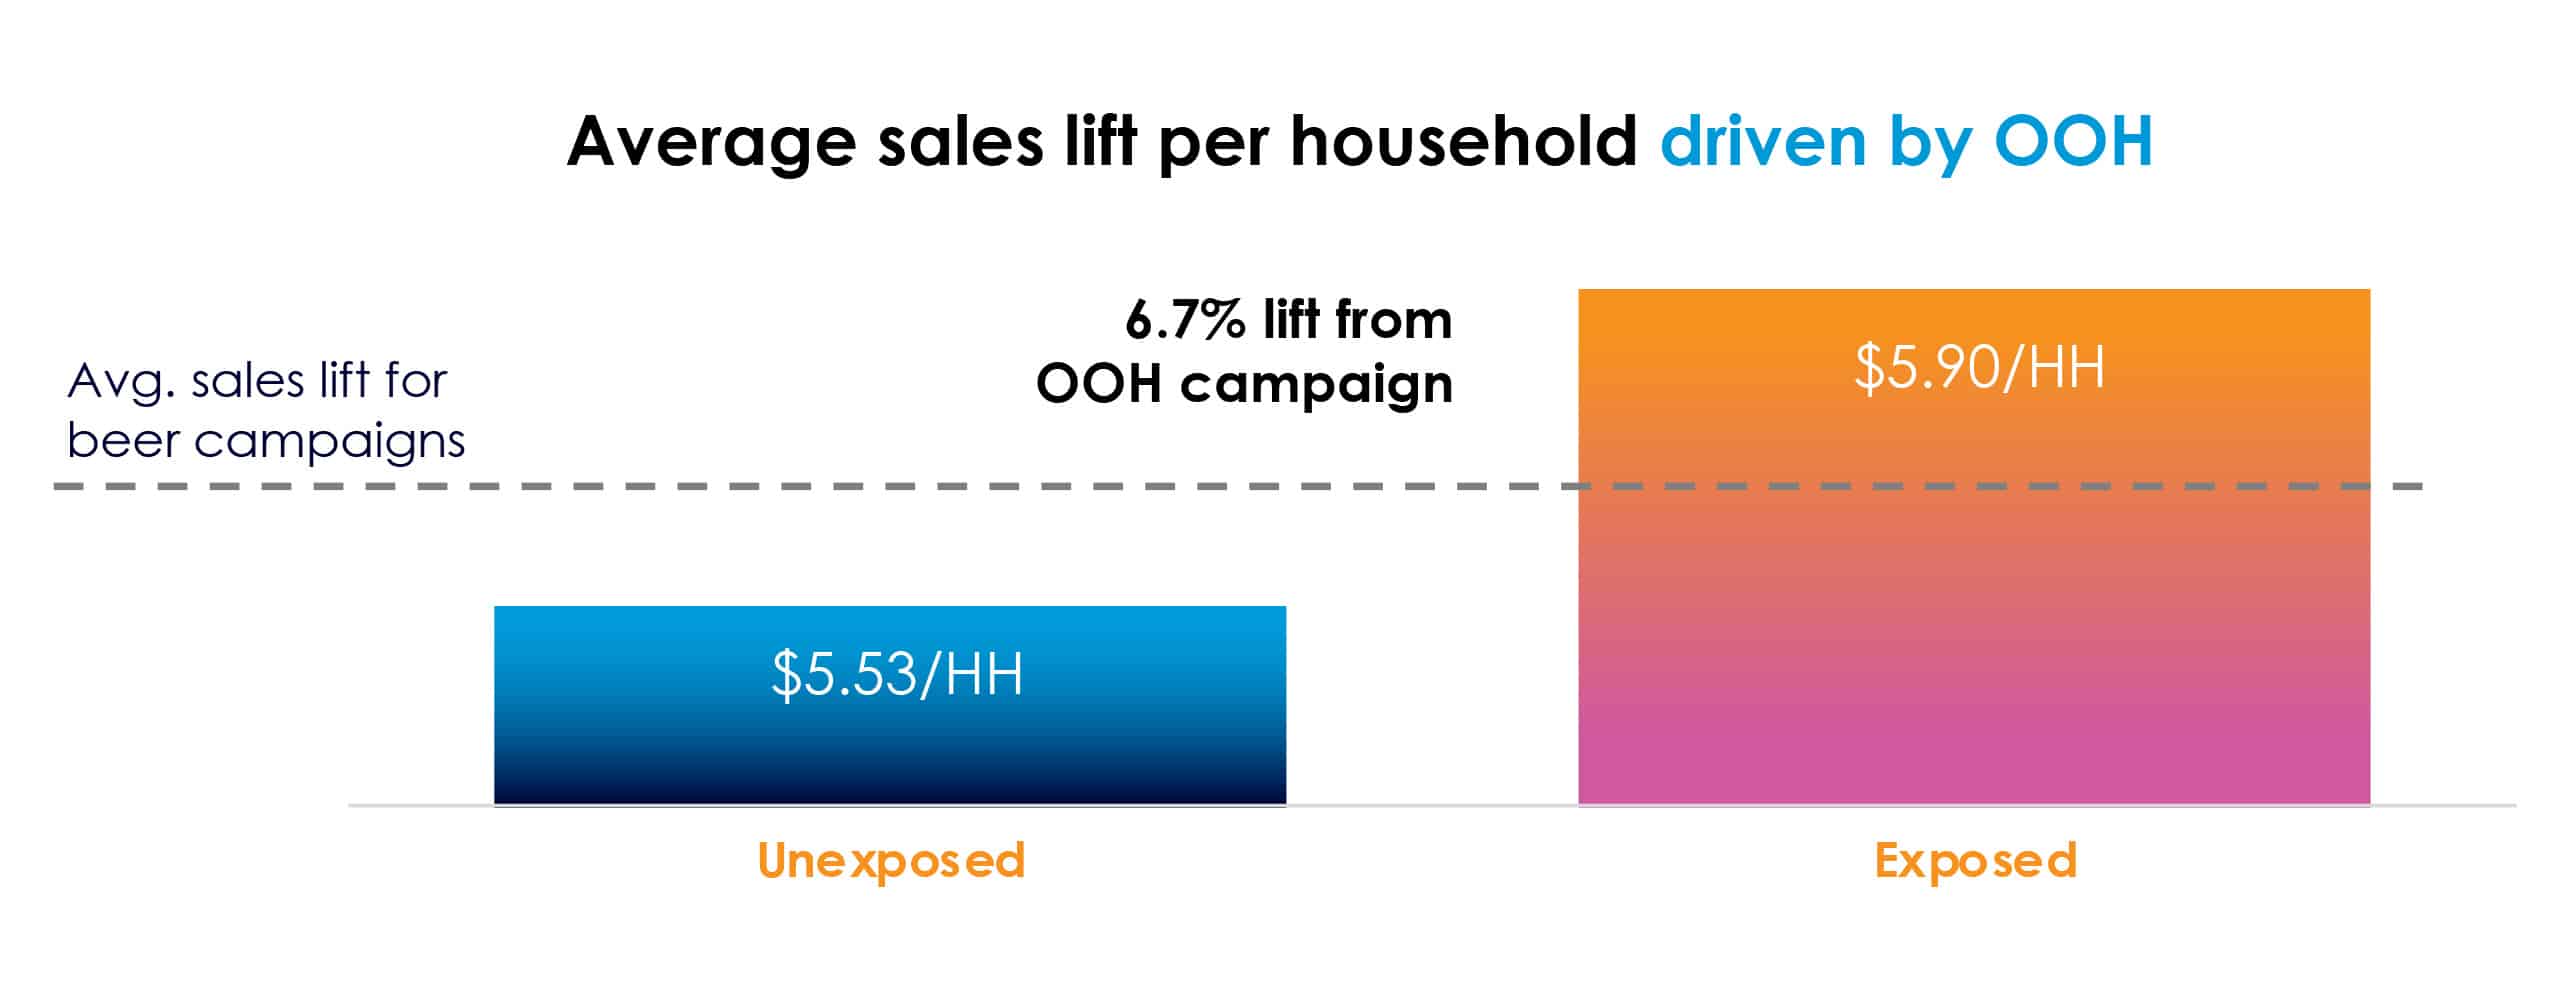 average sales driven by household